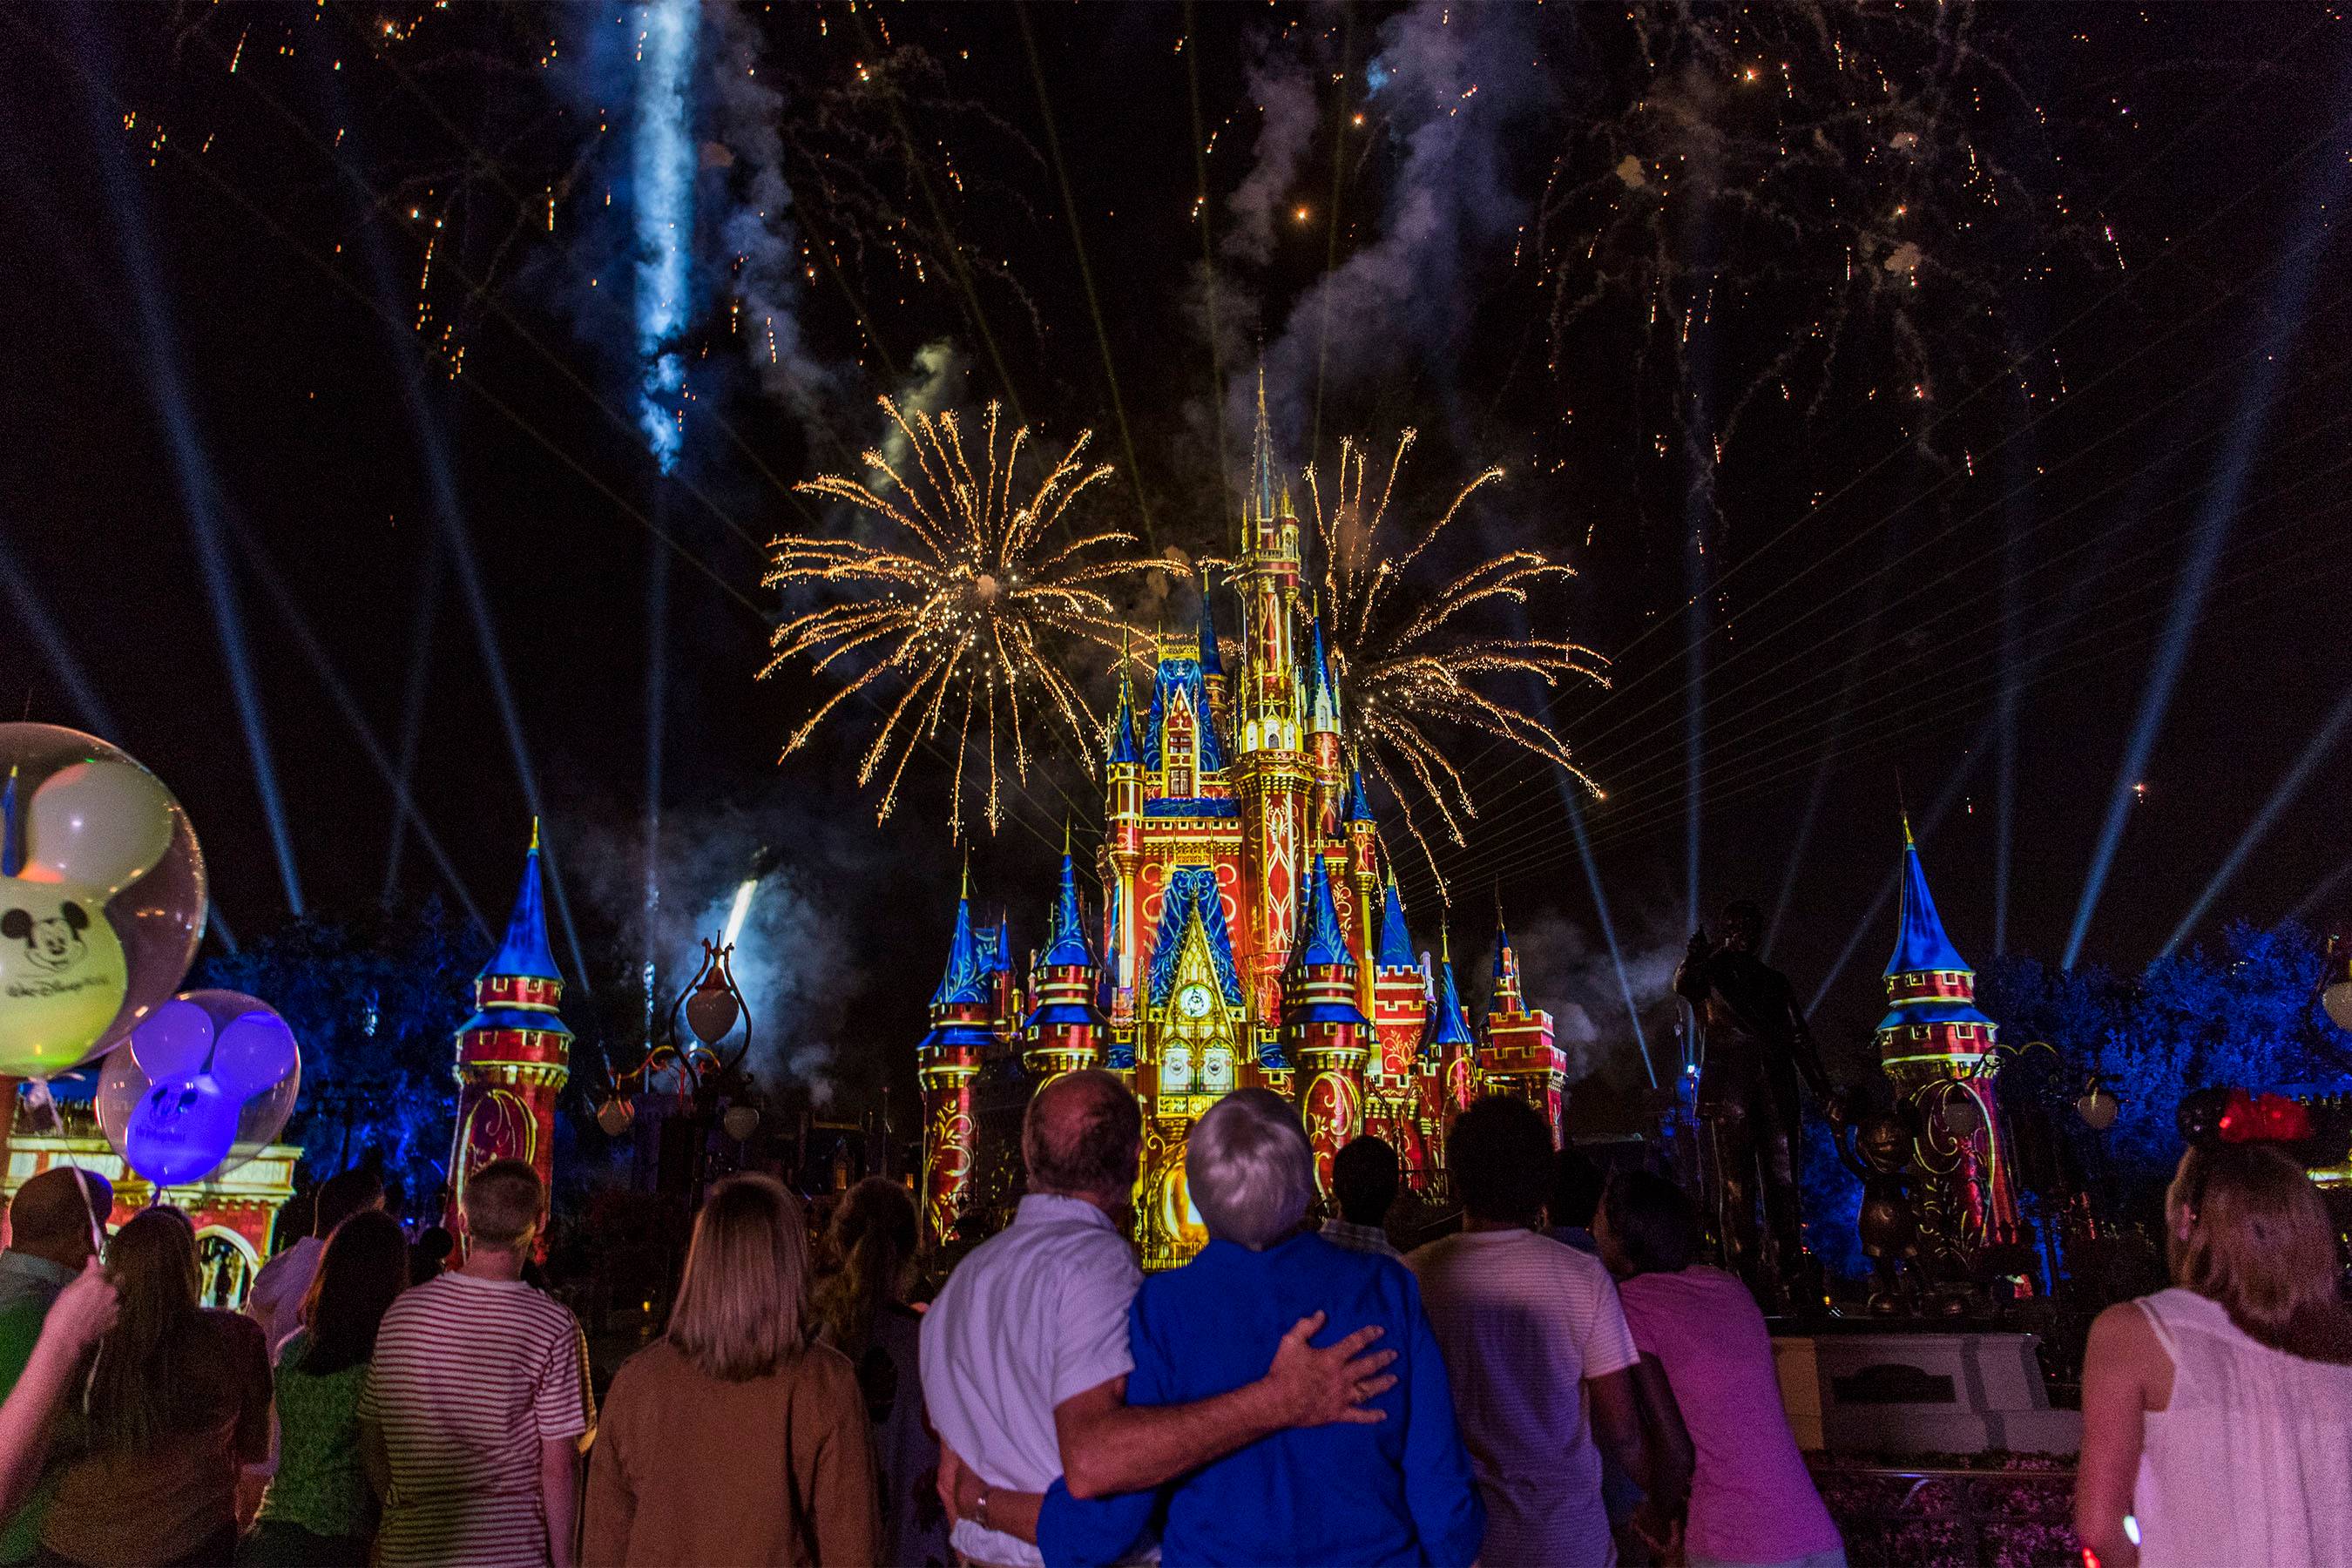 'Happily Ever After' moves to an earlier time slot